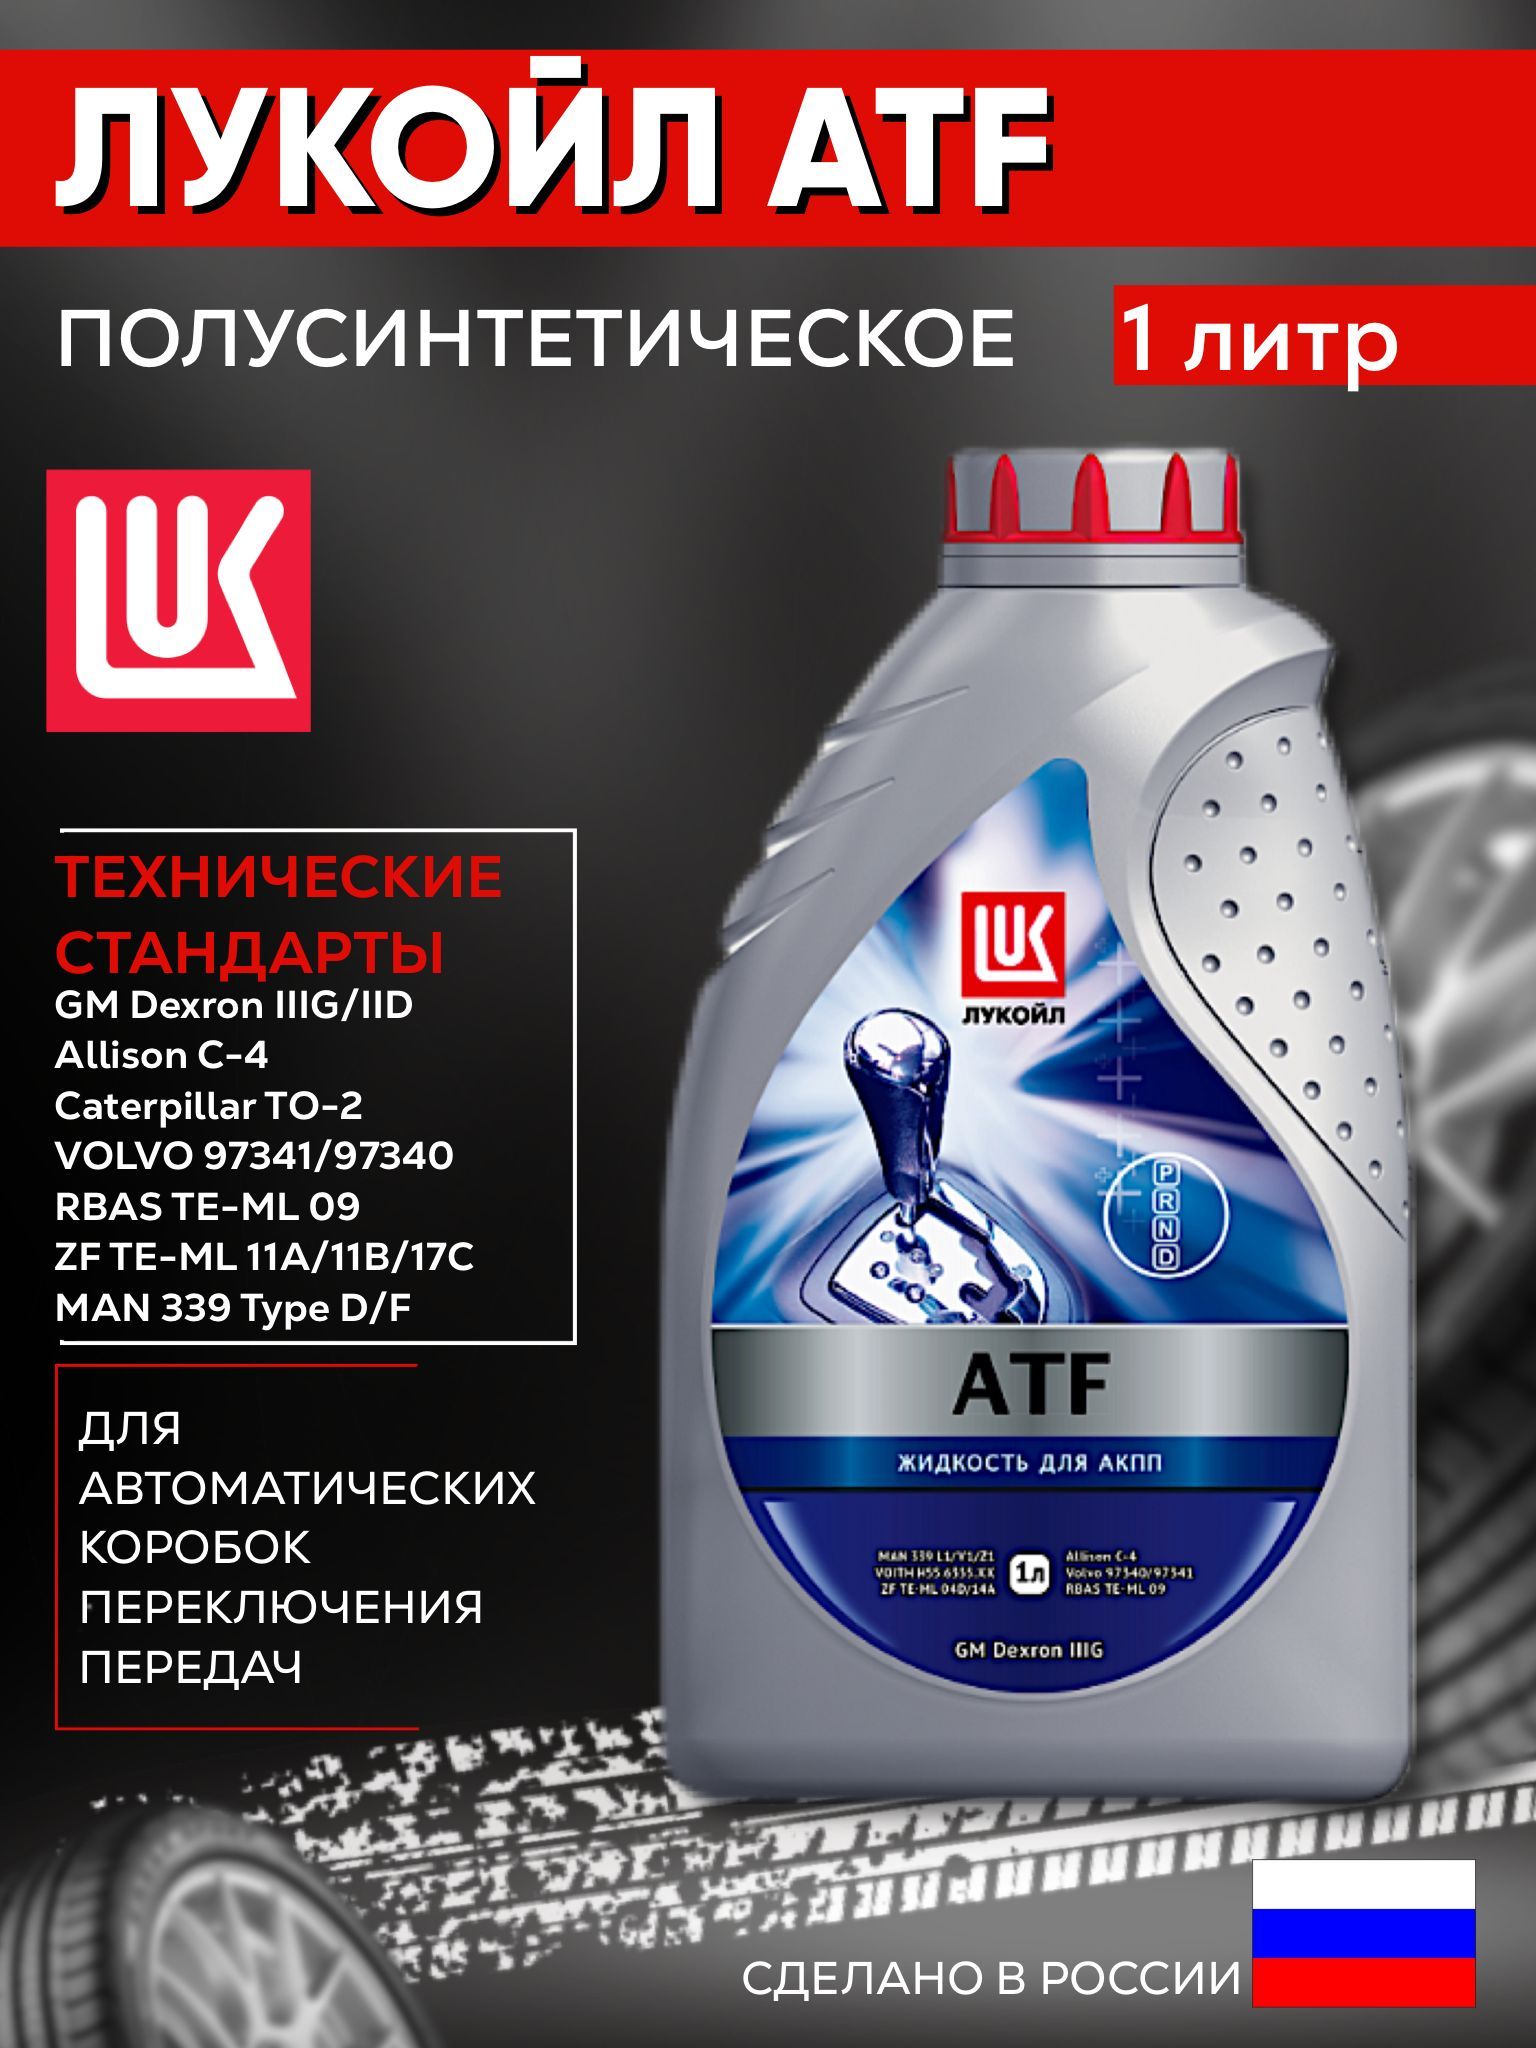 Масло лукойл atf synth. Lukoil 191352 Лукойл ATF DX III. Трансмиссионное масло Лукойл ATF Synth vi. Лукойл трансмиссионное масло 80w90. Масло трансмиссионное "Лукойл" ATF Dextron III (4л.).